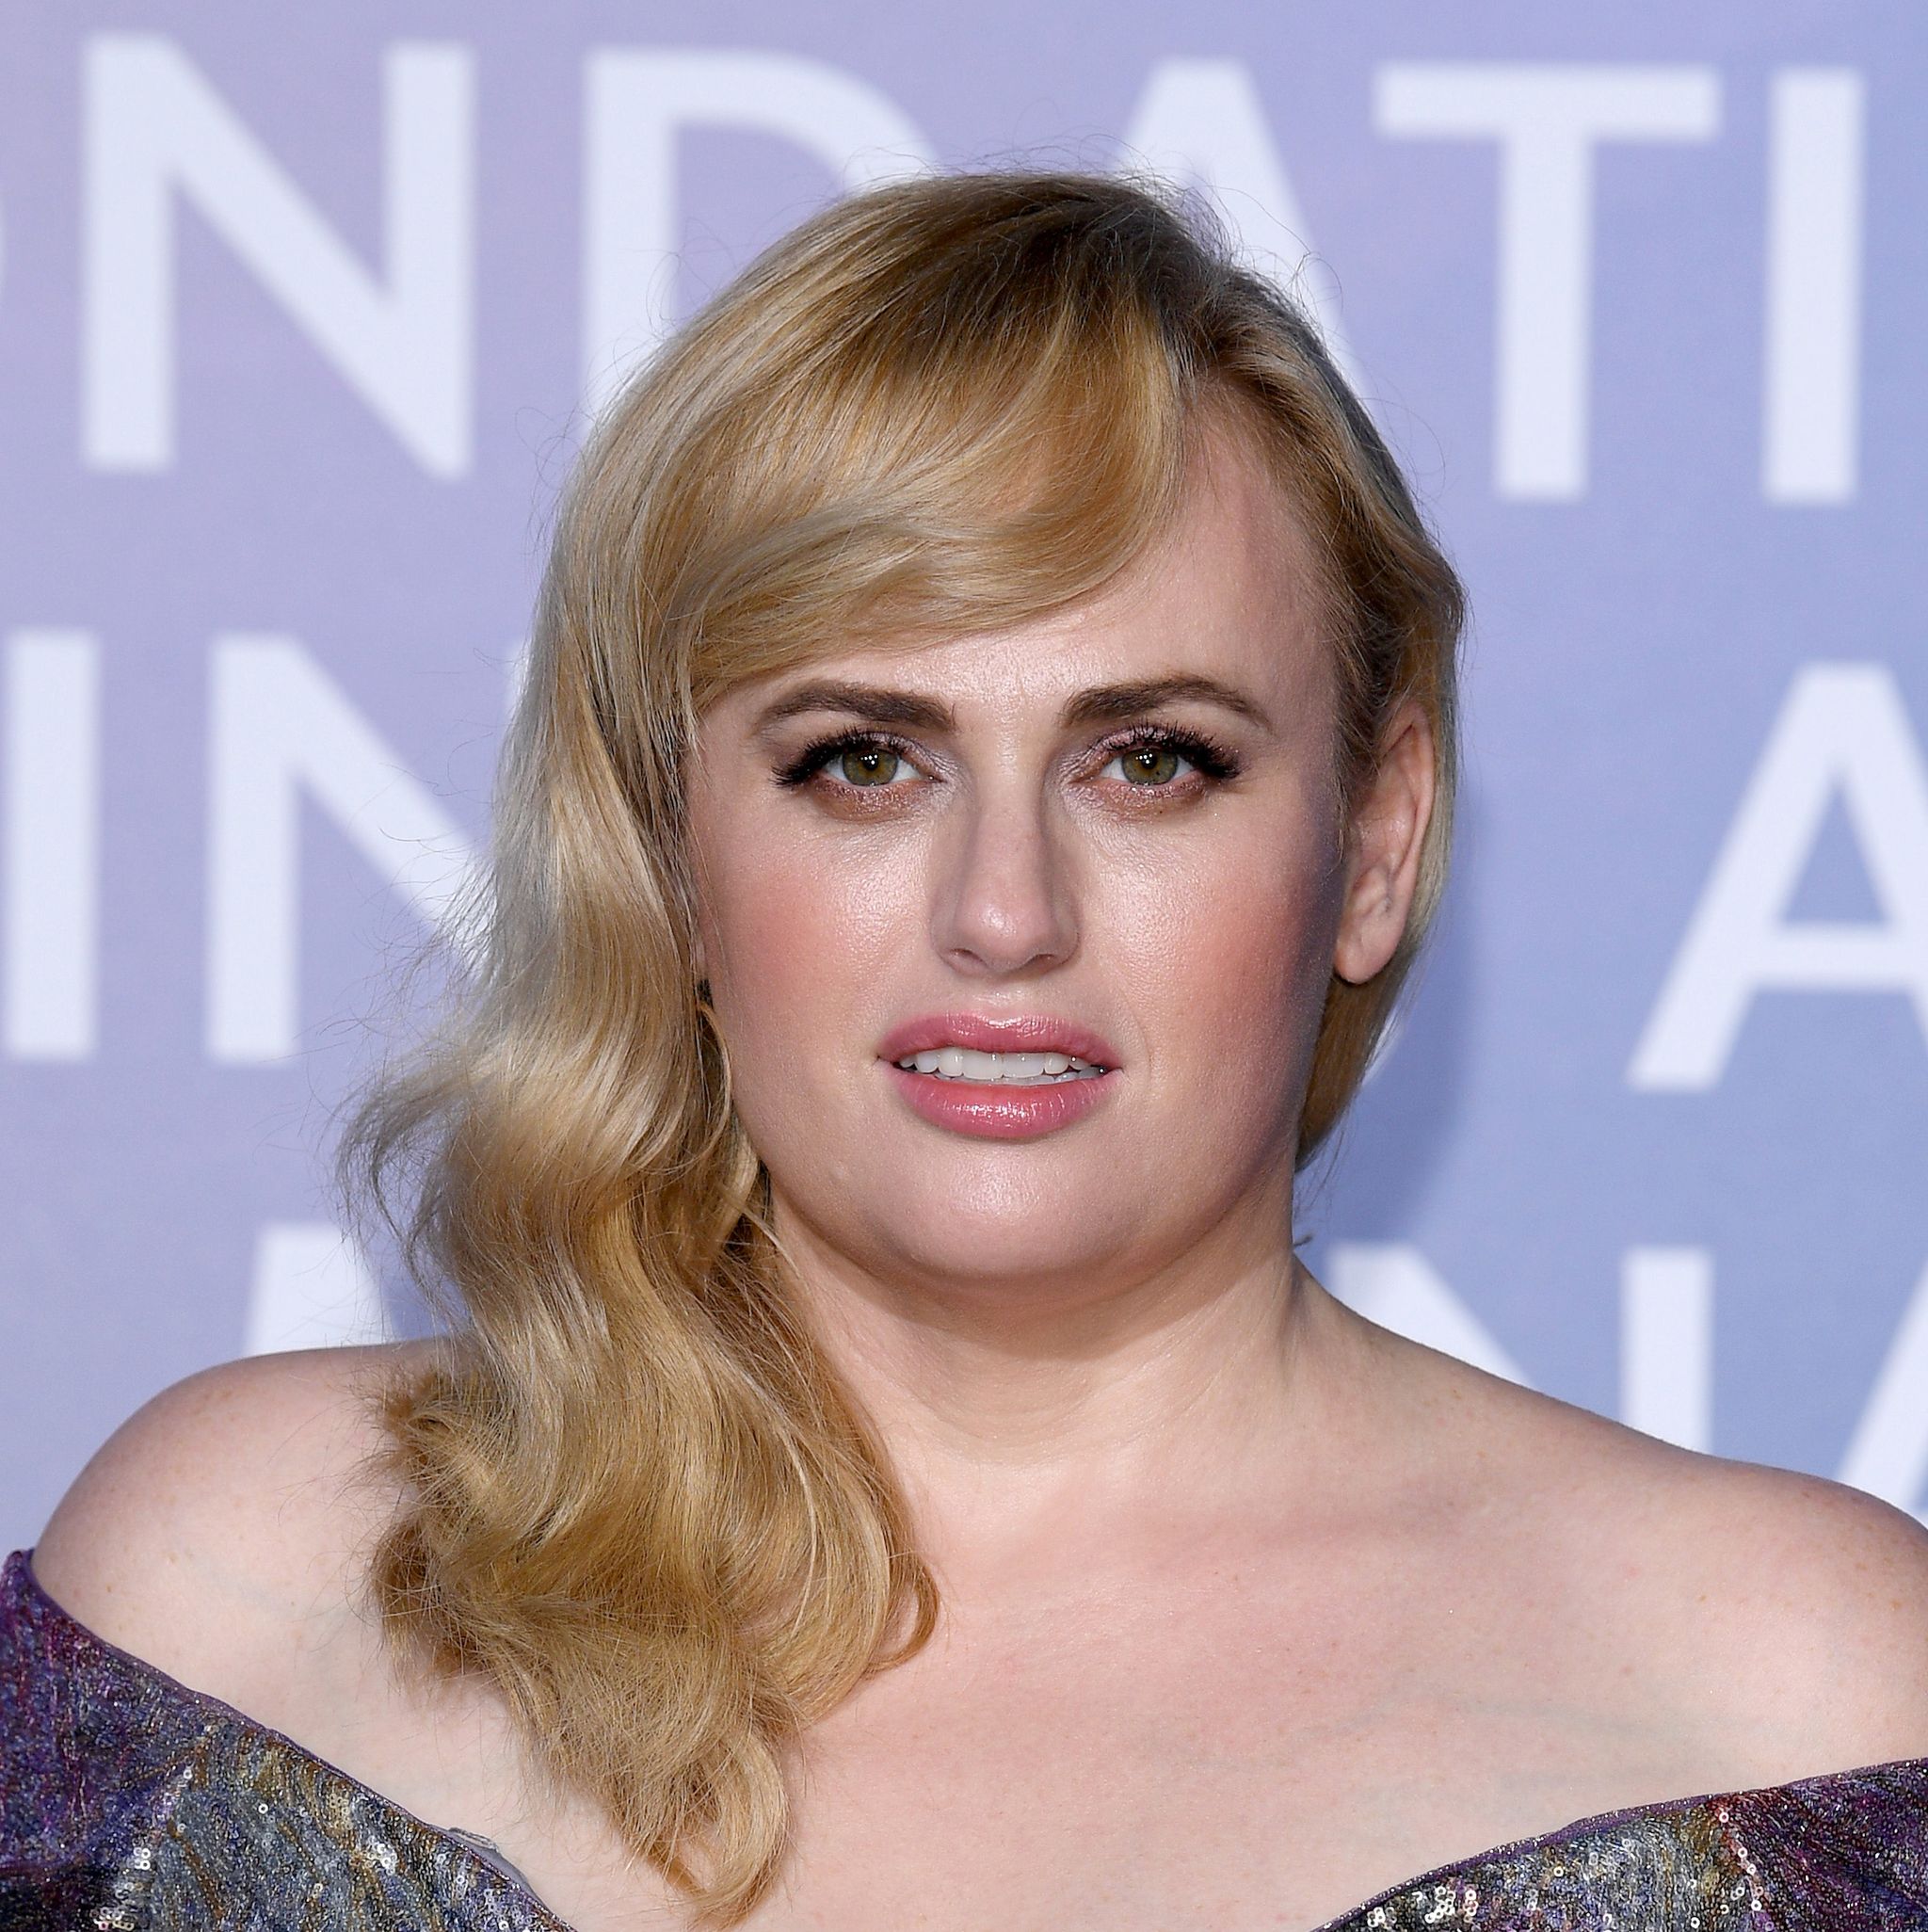 Rebel Wilson discusses being tied up and held at gunpoint